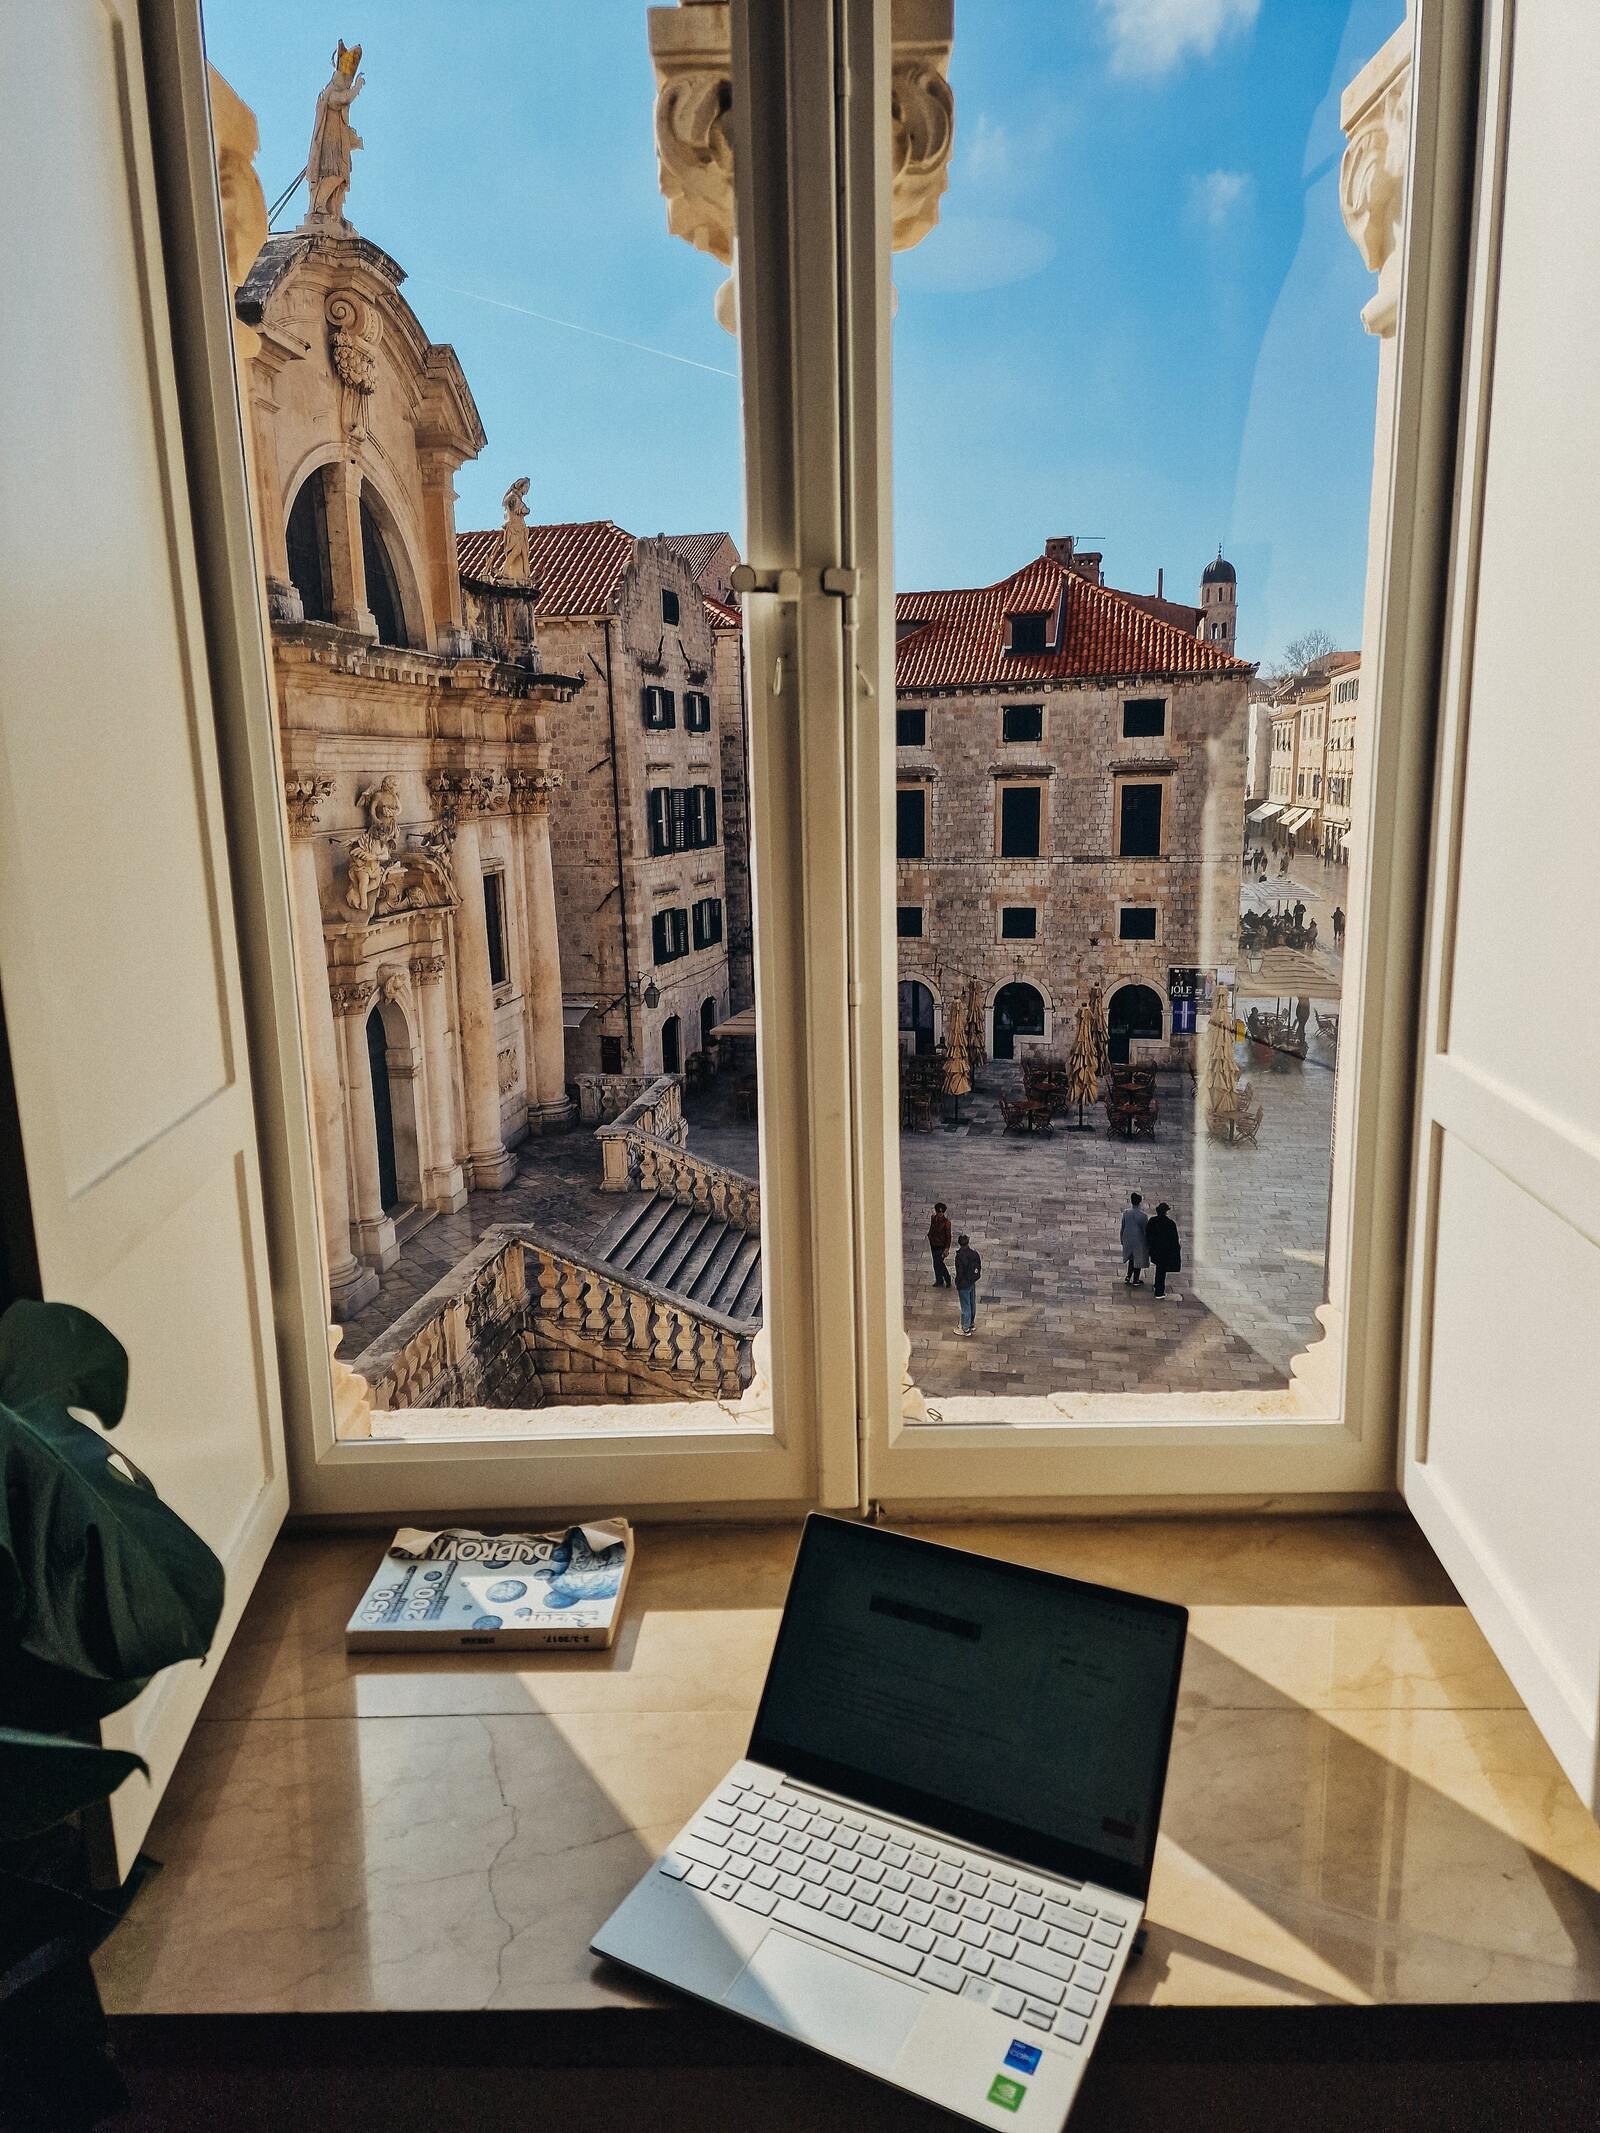 digital nomad in dubrovnik with a laptop working at a window with a view of dubrovnik old town